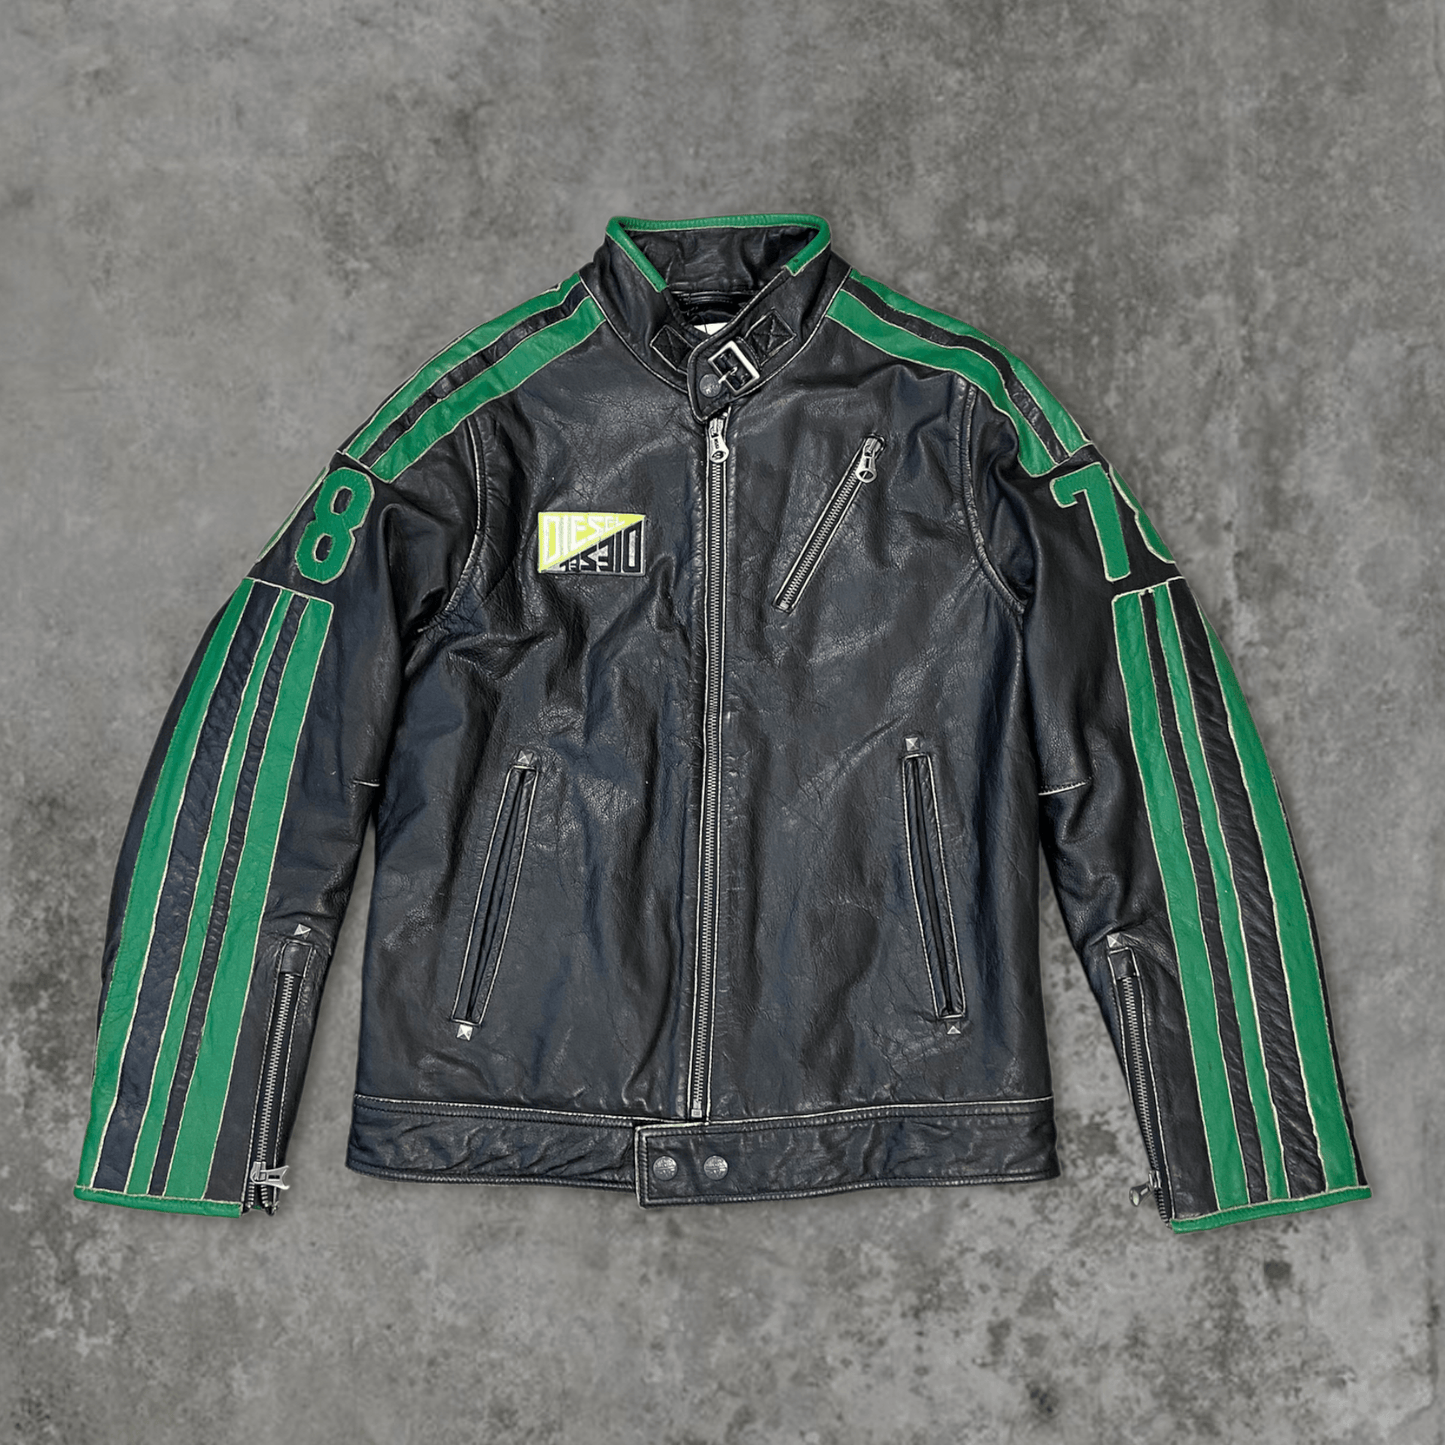 DIESEL 'FAST' RACER LEATHER JACKET - M - Known Source